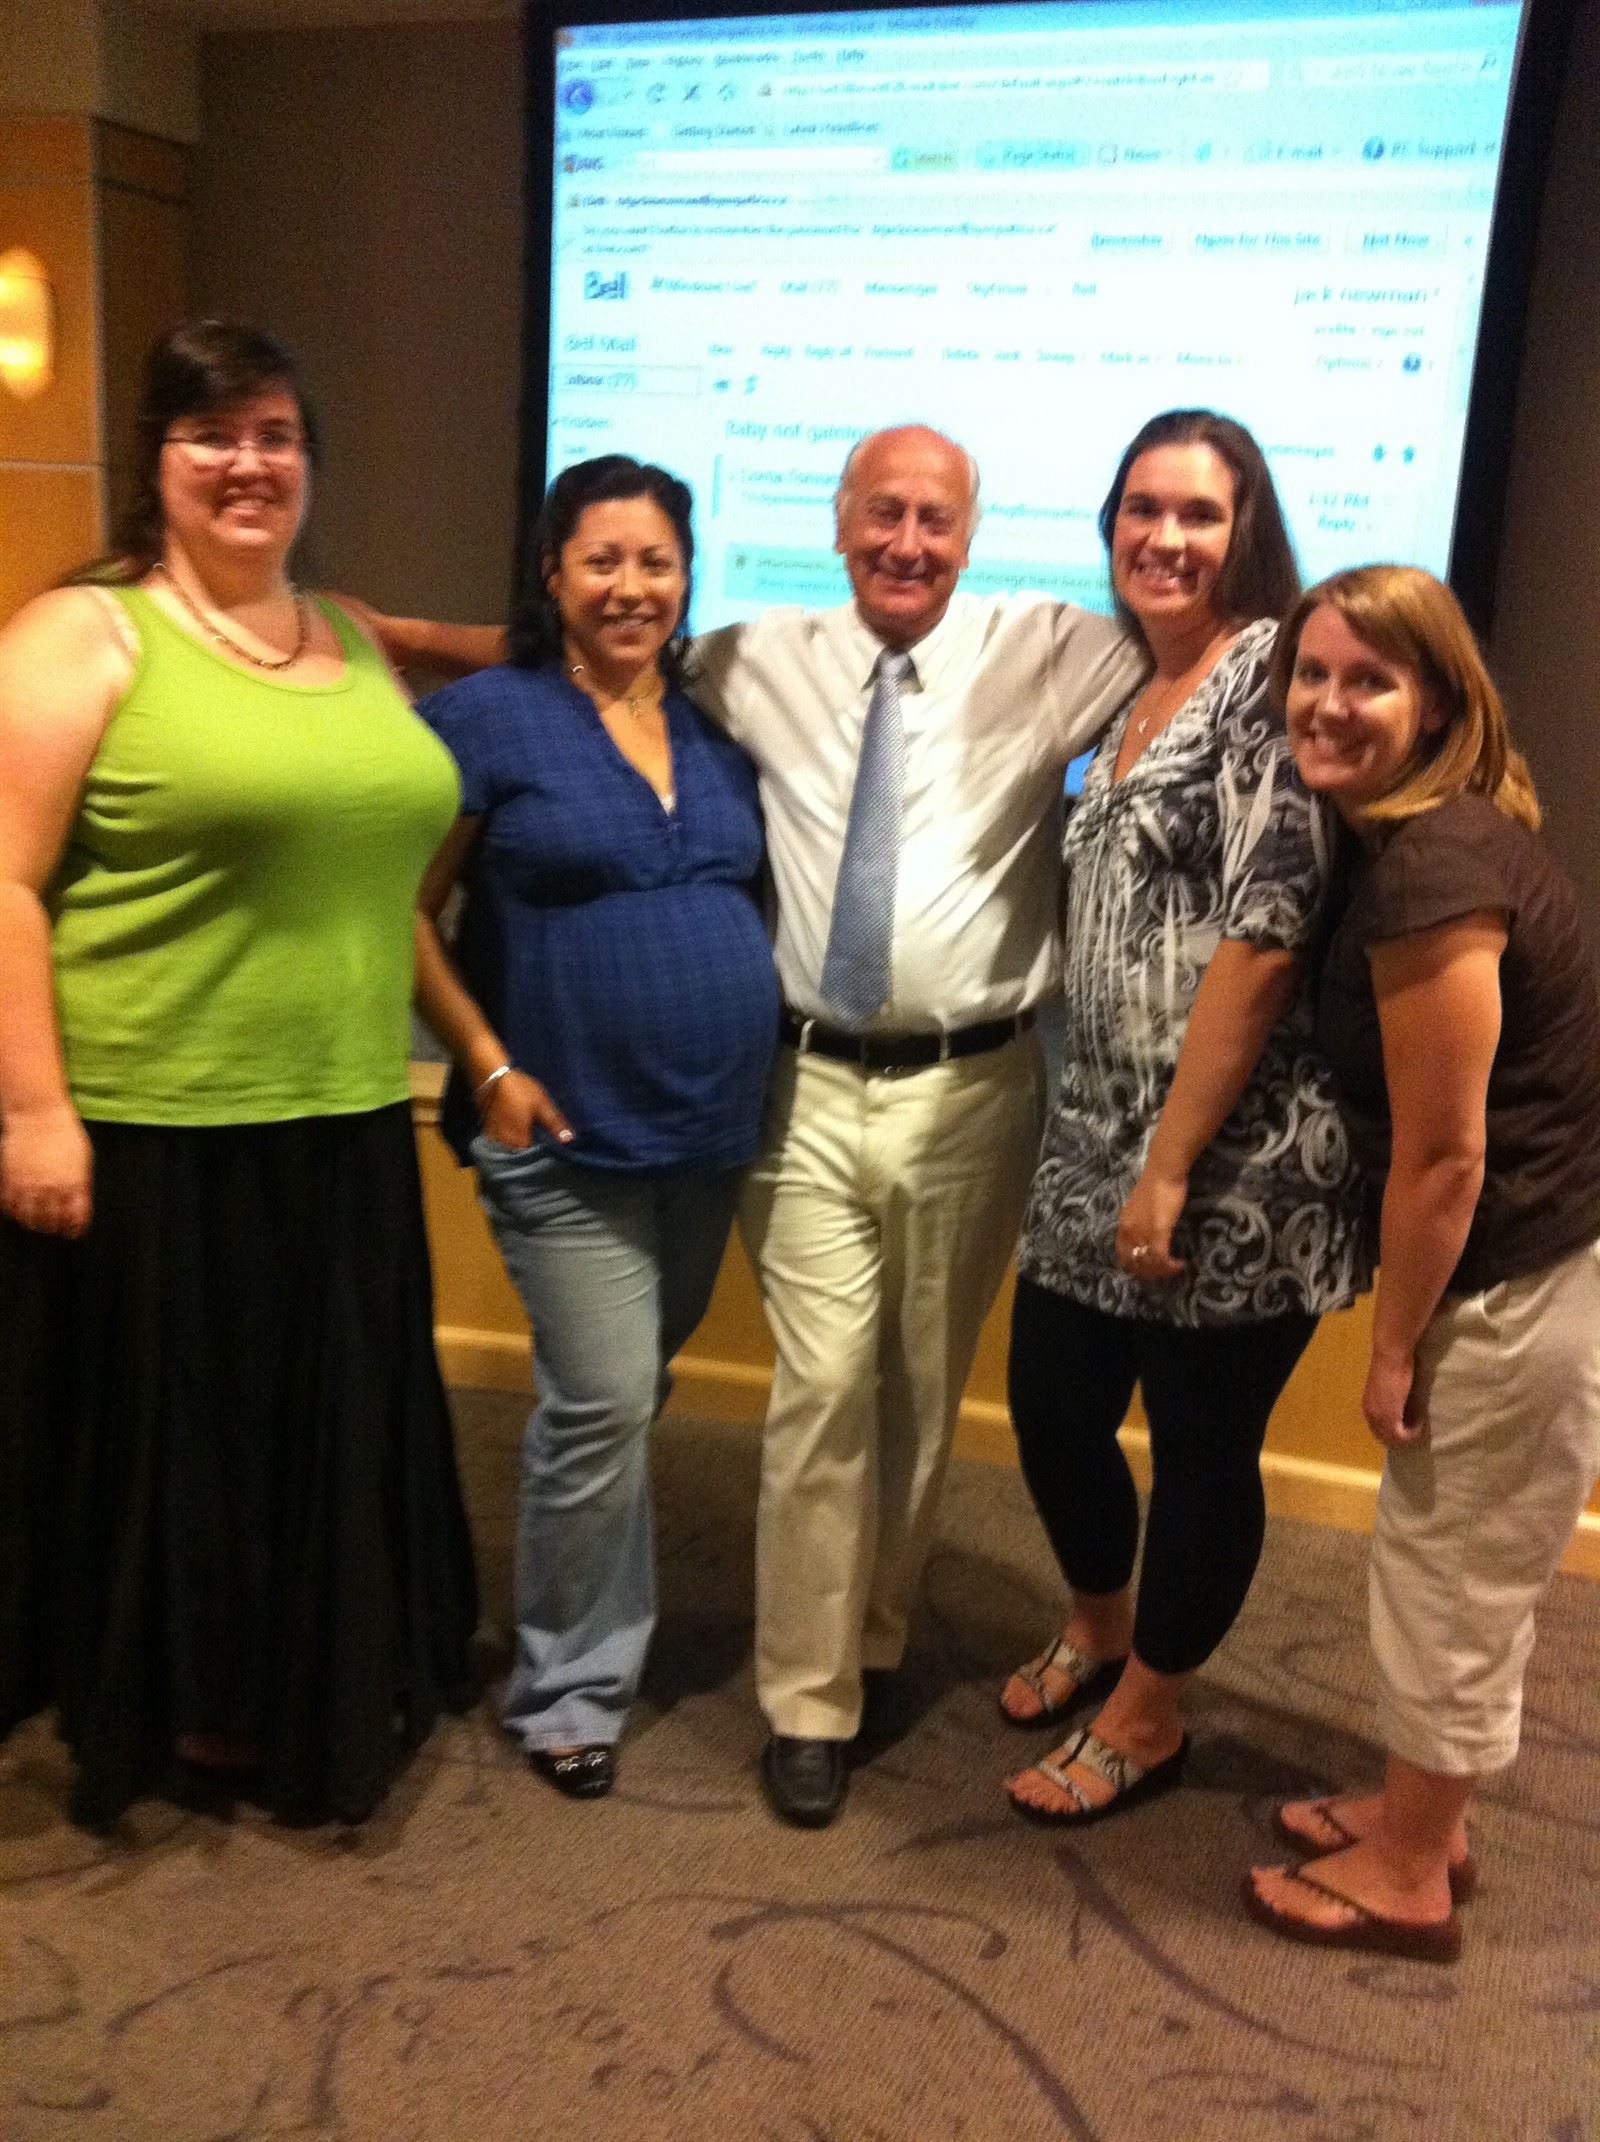 Dr. Jack Newman : Four instructors who teach The Bradley Method® got to attend his seminar in Mesa, AZ.